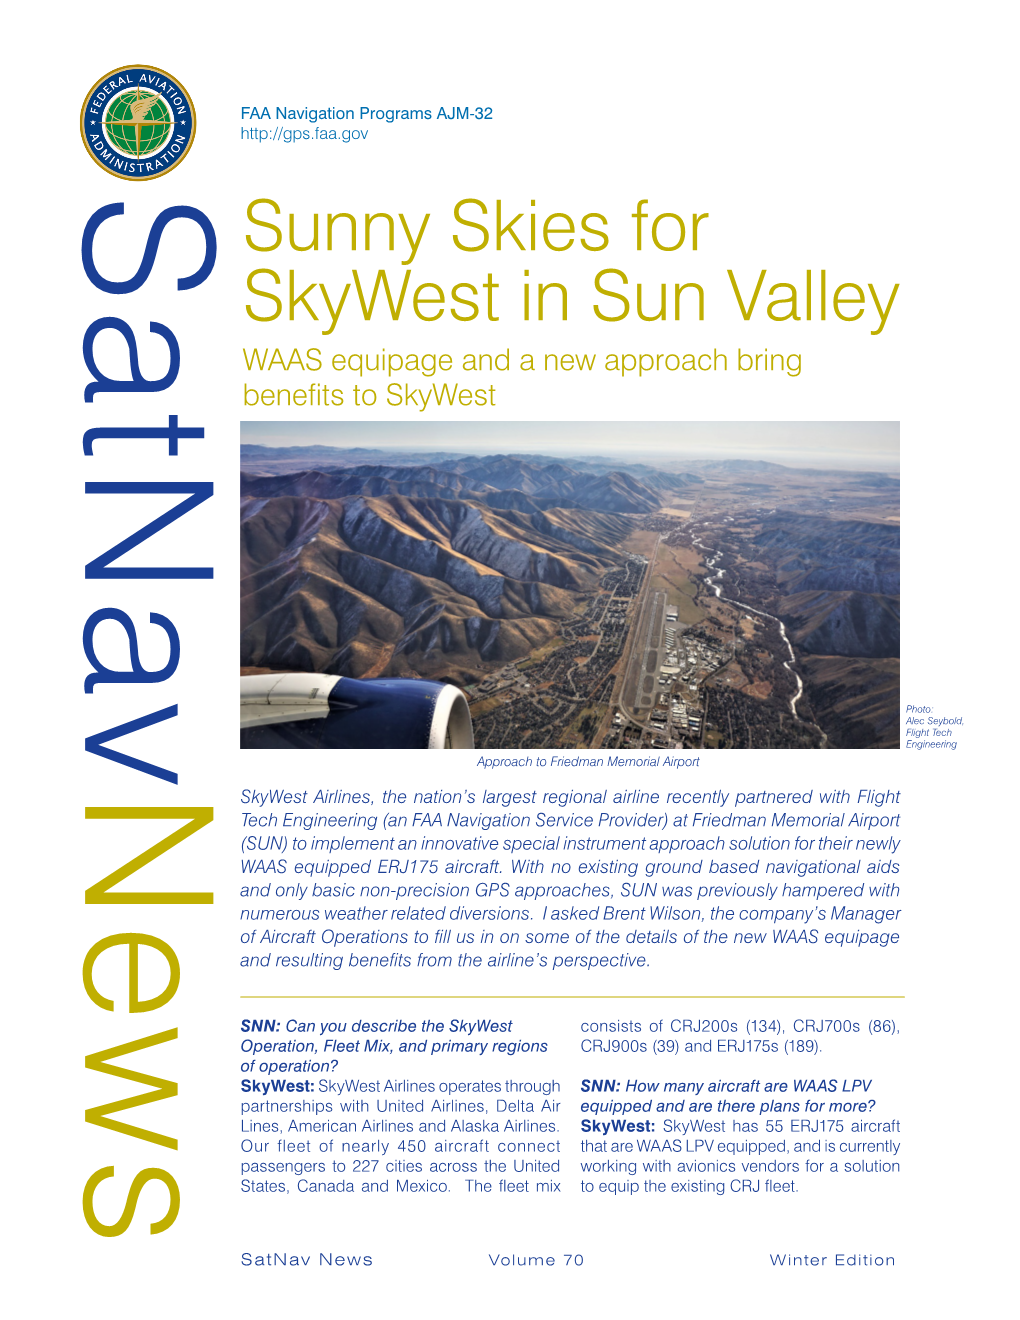 Sunny Skies for Skywest in Sun Valley WAAS Equipage and a New Approach Bring Benefits to Skywest